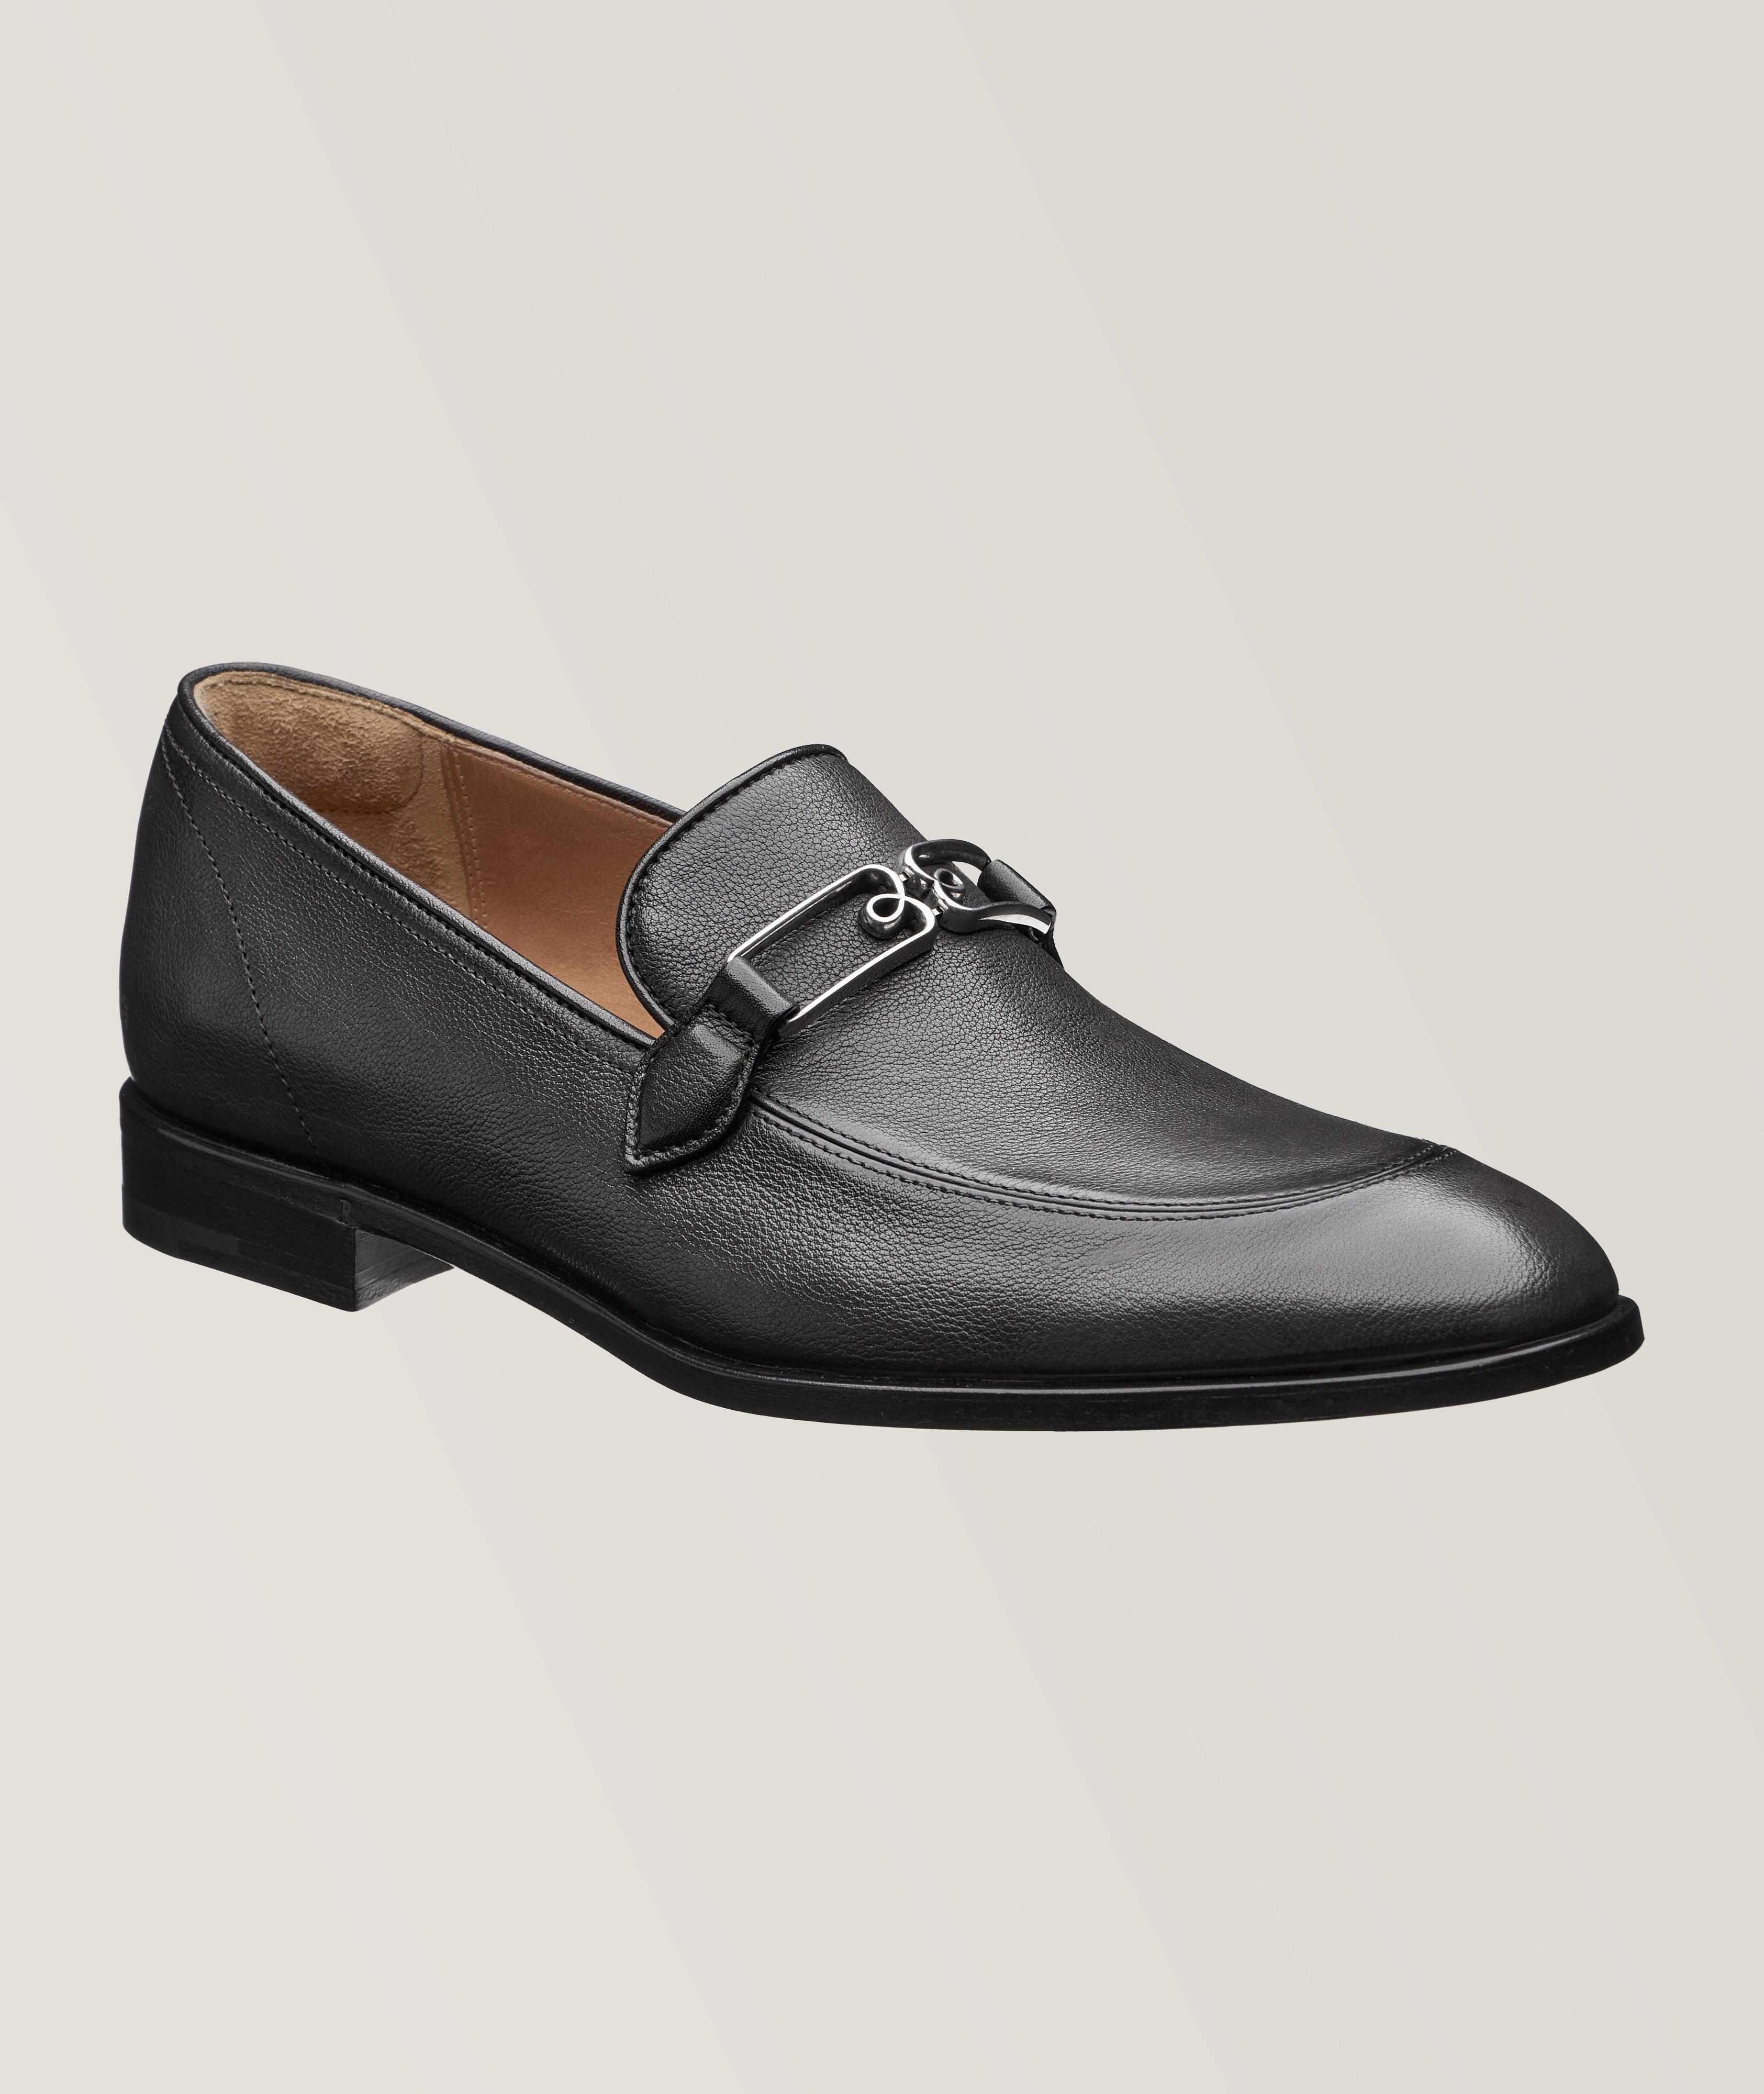 B Volute Grained Leather Loafers image 0